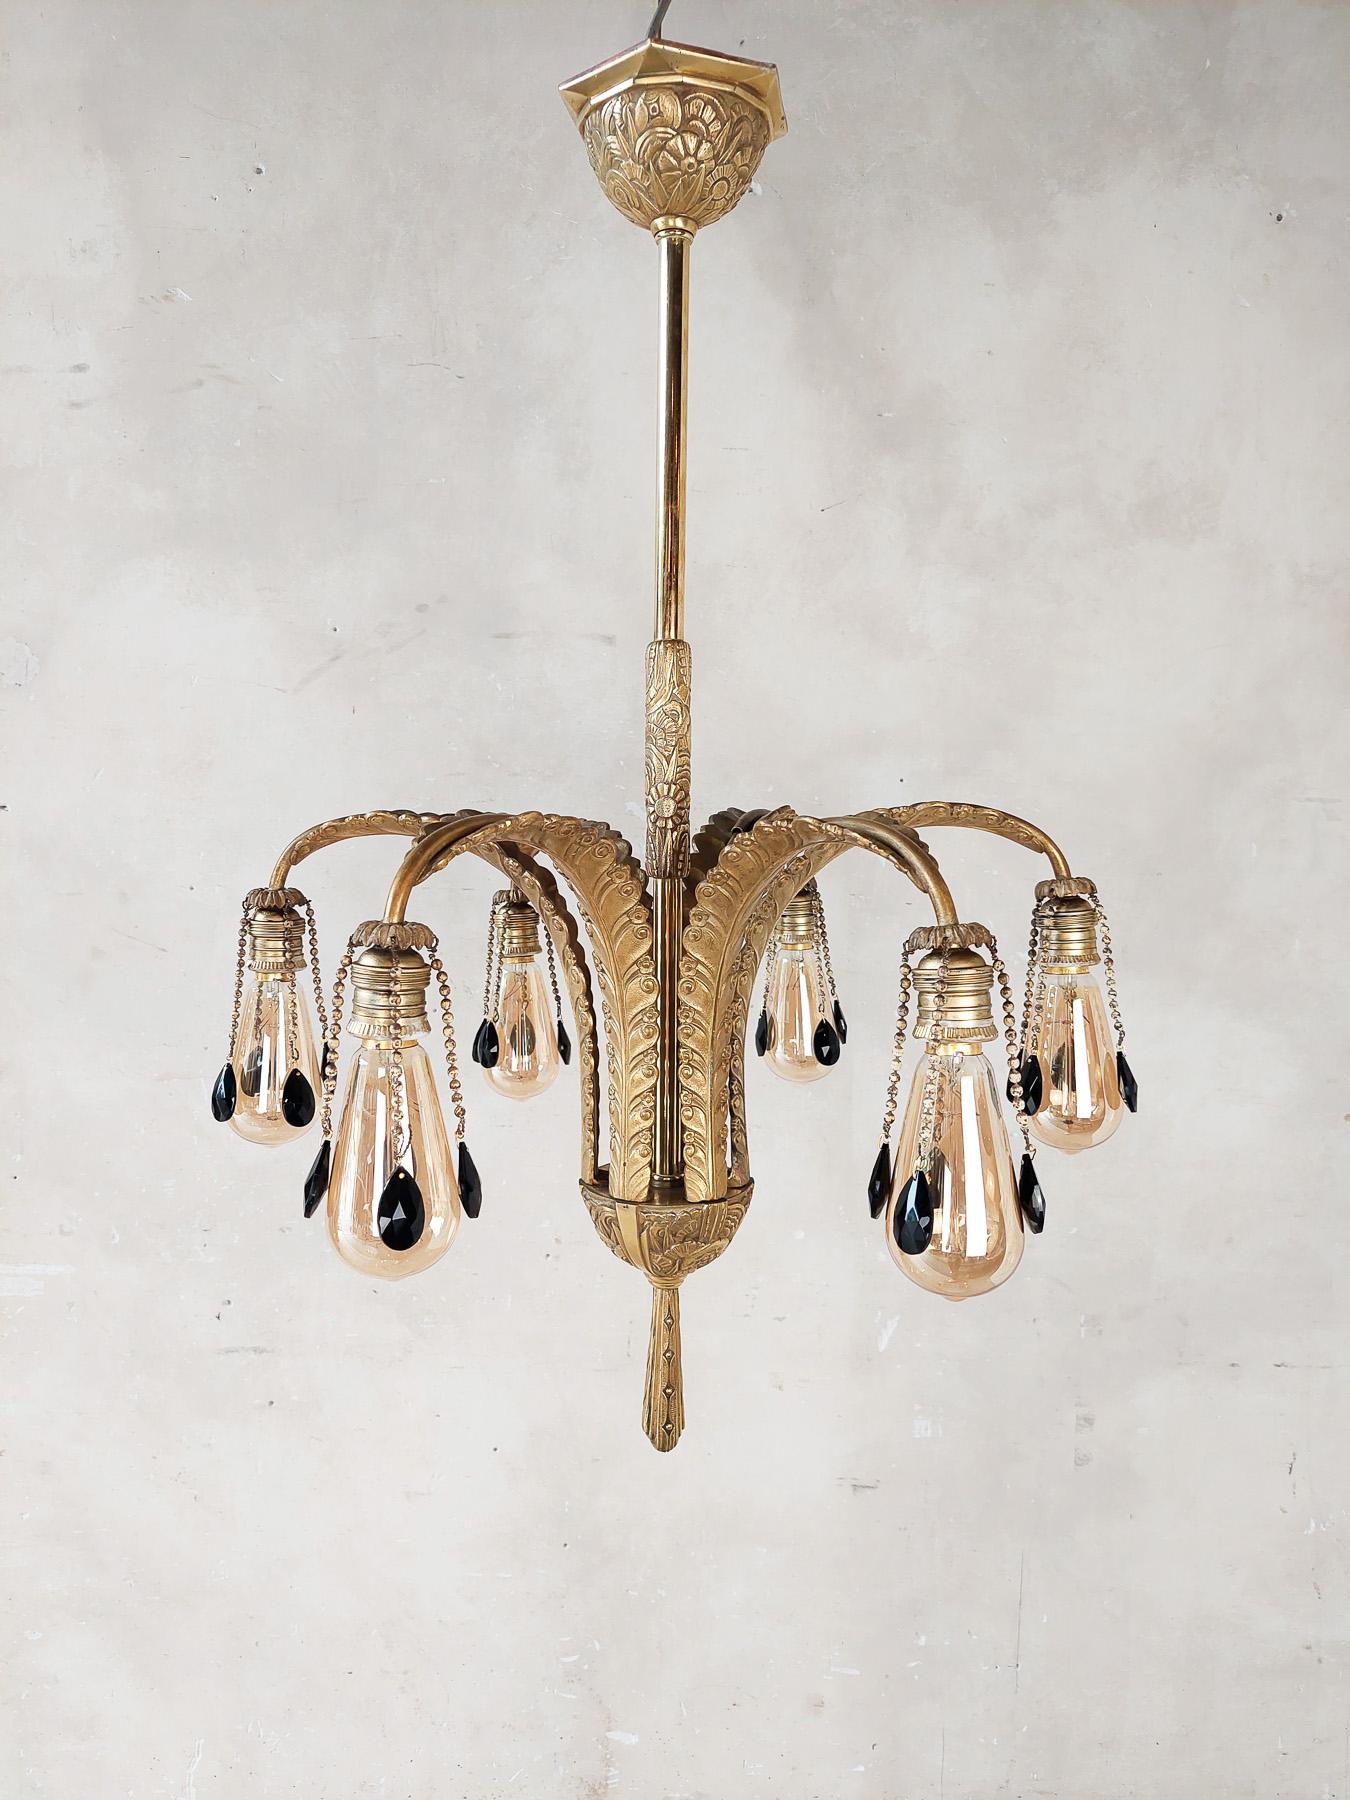 Mid-20th Century Midcentury Brass Chandelier with Feather Shaped Arms and Black Pearls For Sale